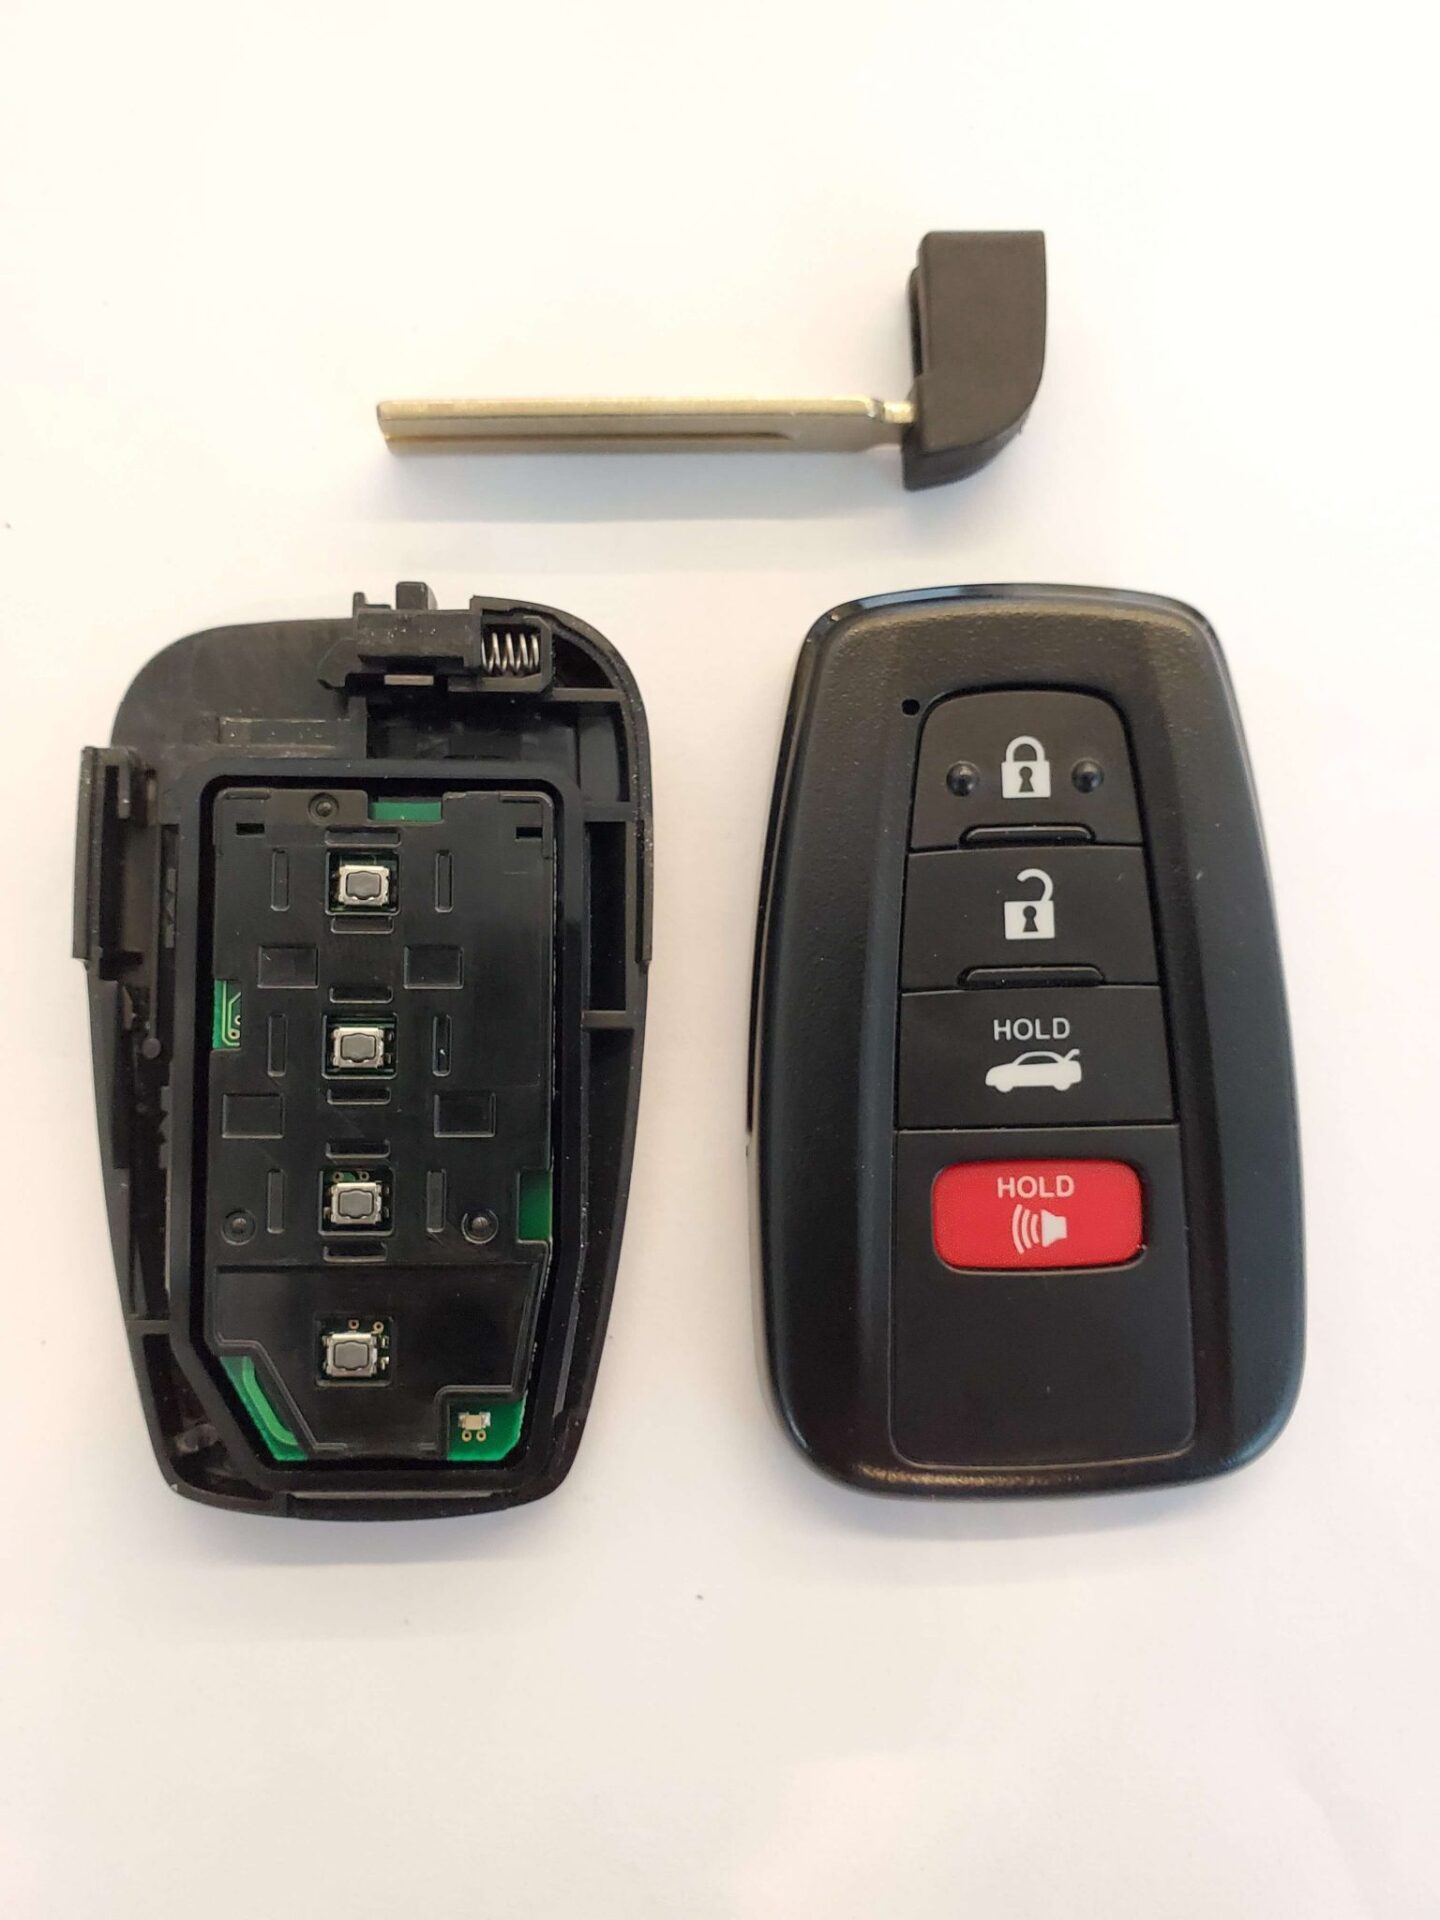 Toyota Prius Key Replacement What To Do, Options, Costs & More